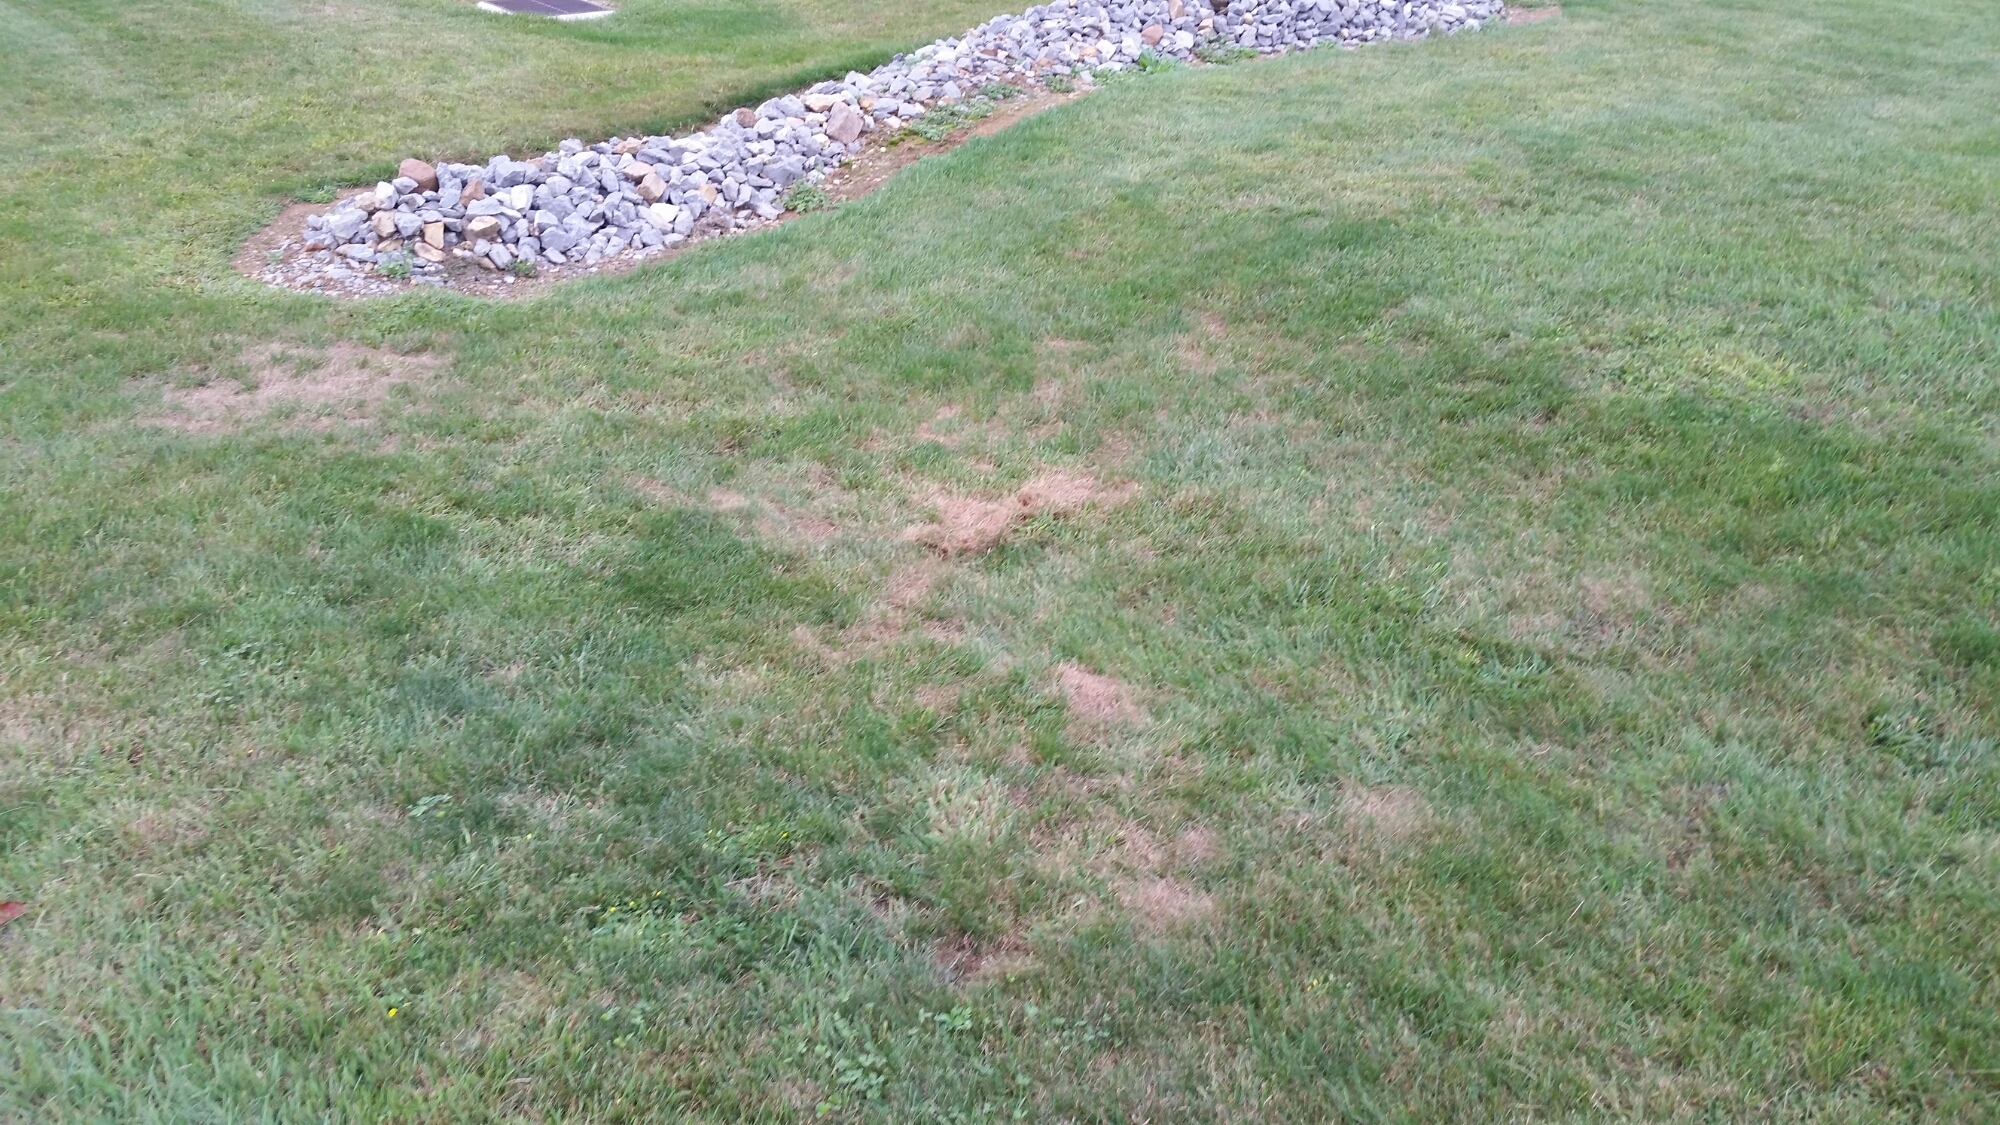 Grass with brown spots caused by grubs